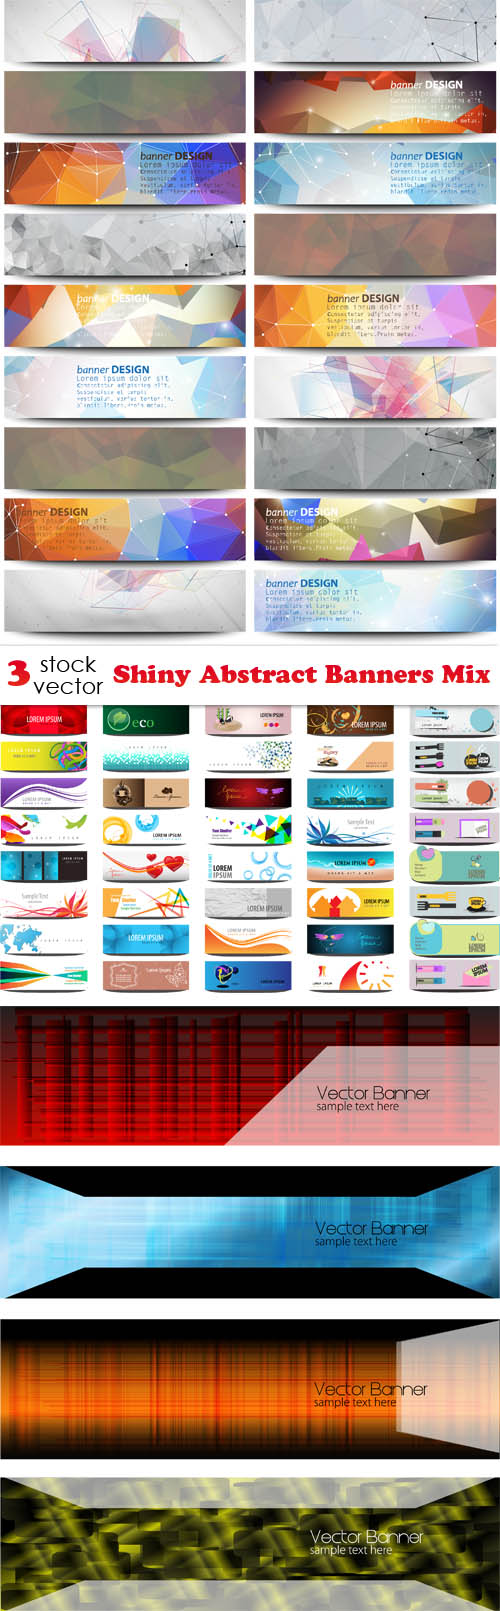 Vectors - Shiny Abstract Banners Mix 5